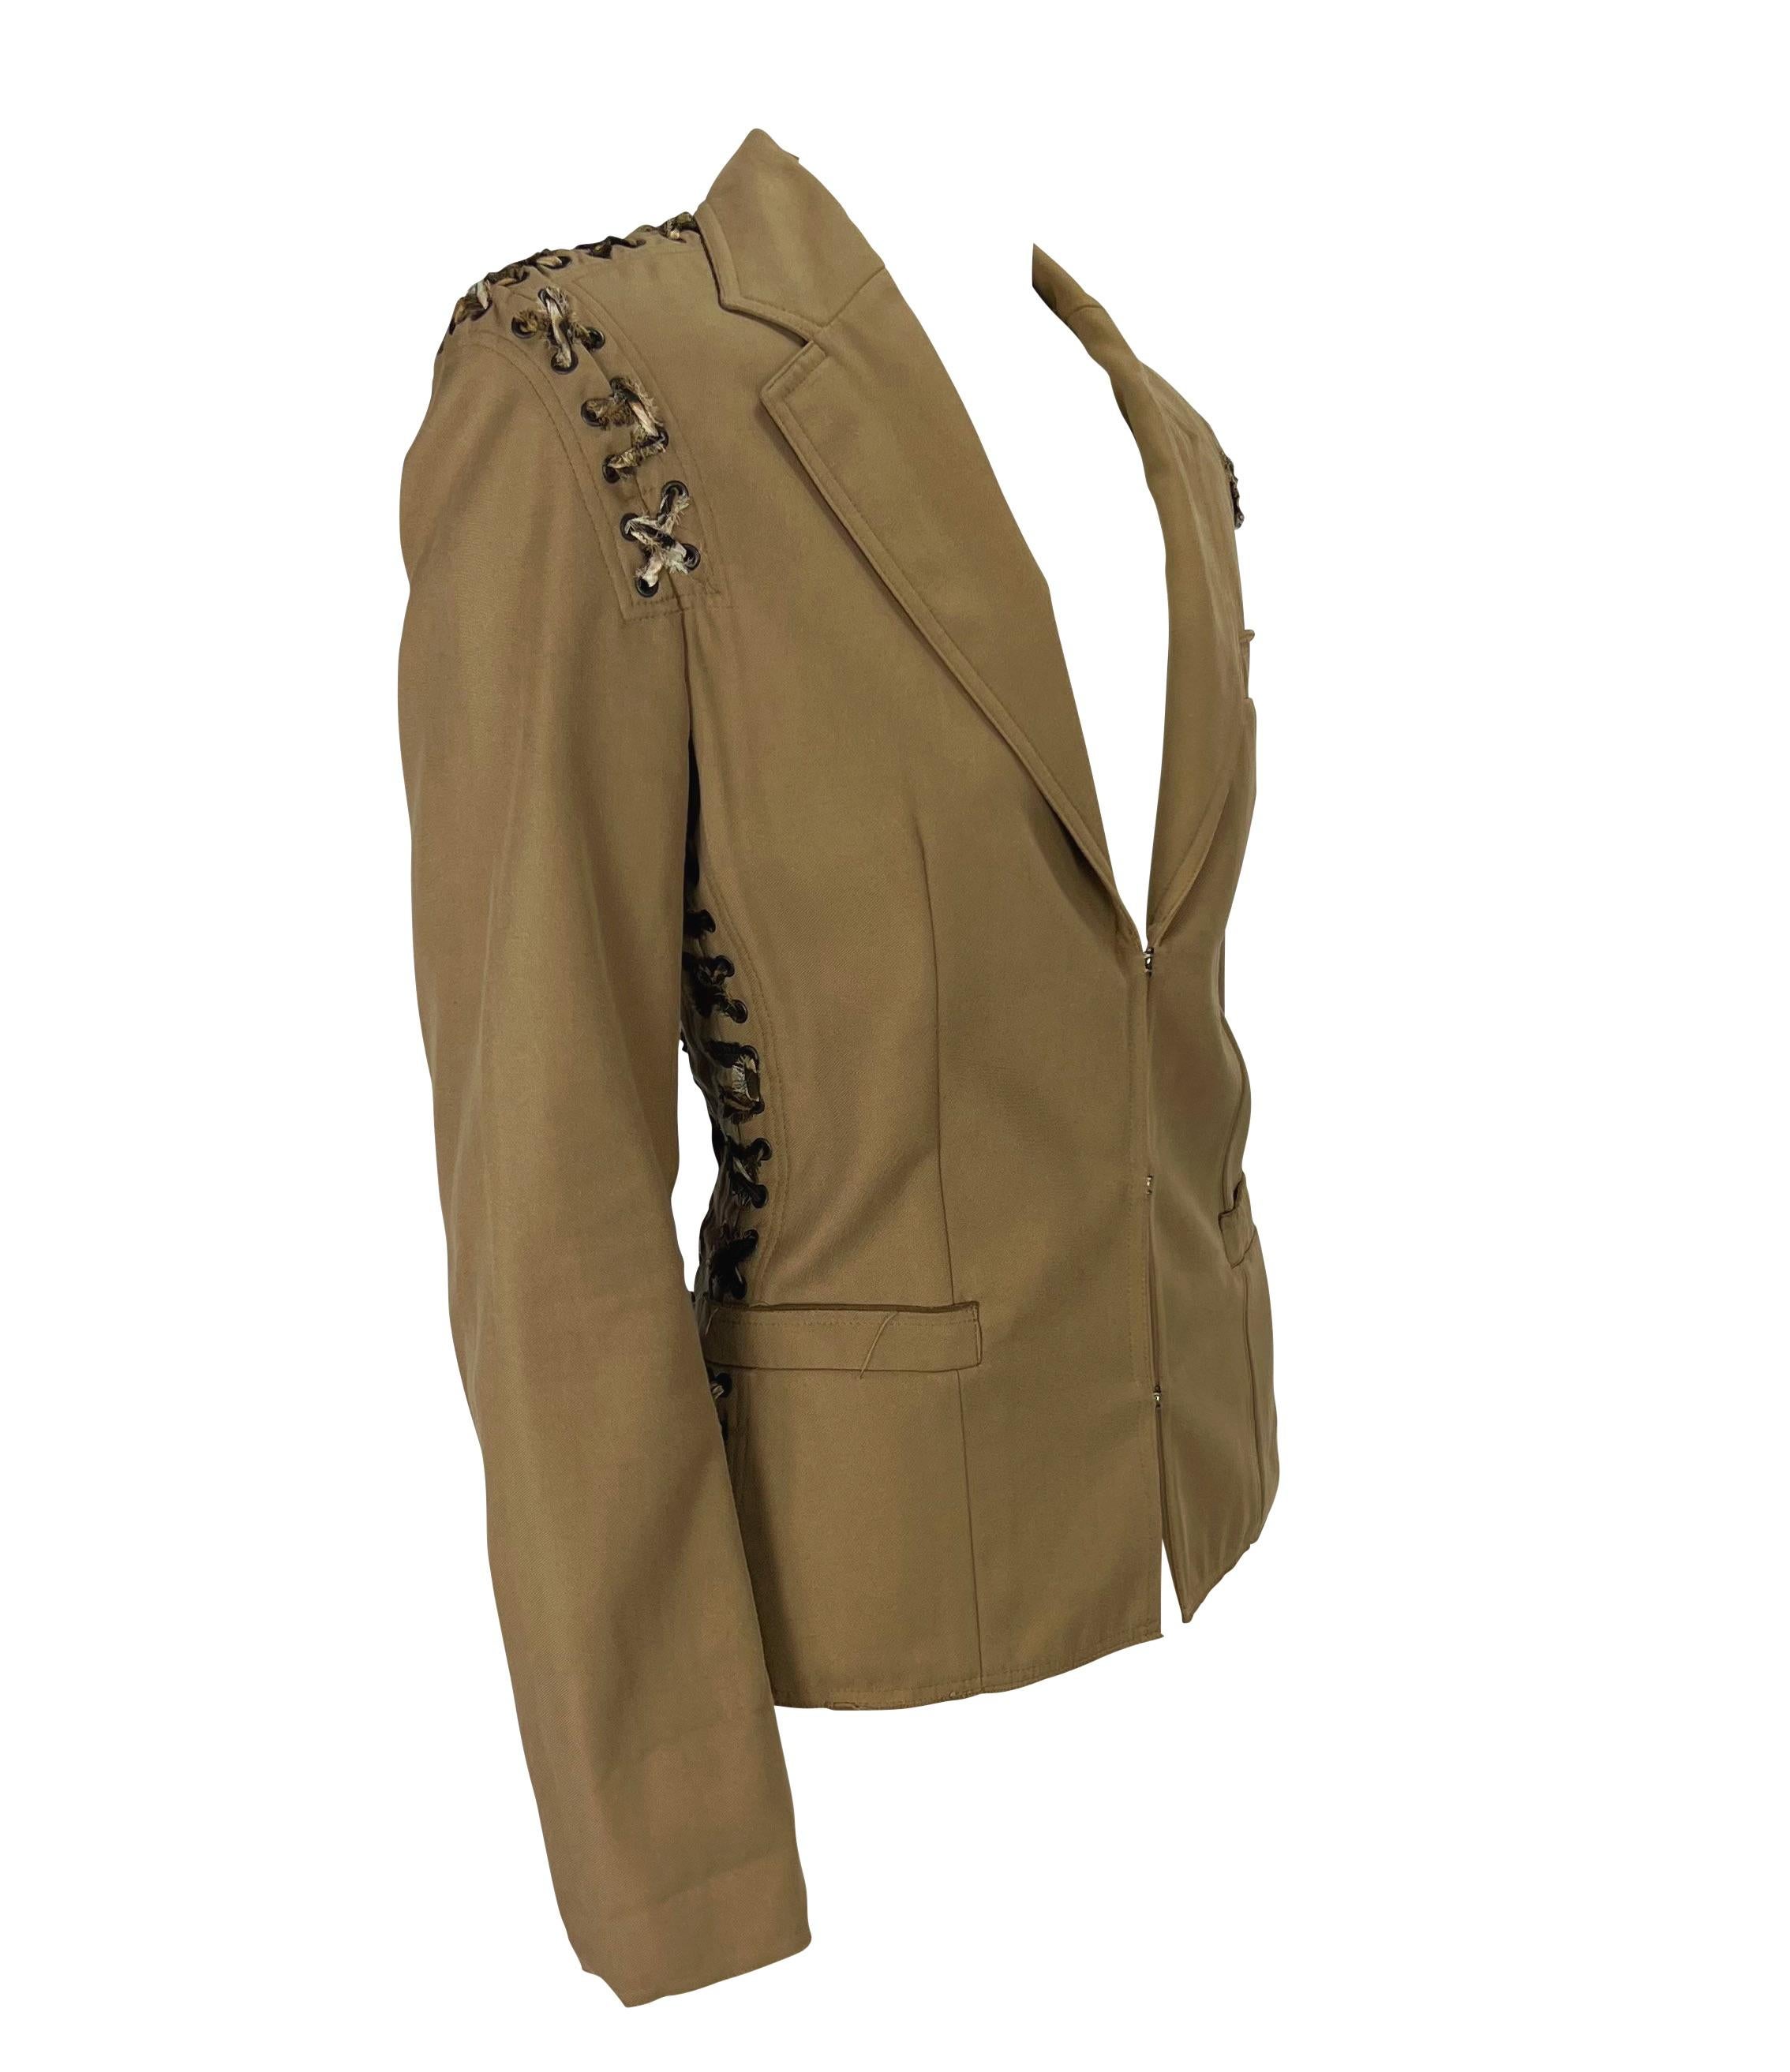 S/S 2002 Yves Saint Laurent by Tom Ford Safari Cheetah Lace-Up Khaki Blazer In Excellent Condition For Sale In West Hollywood, CA